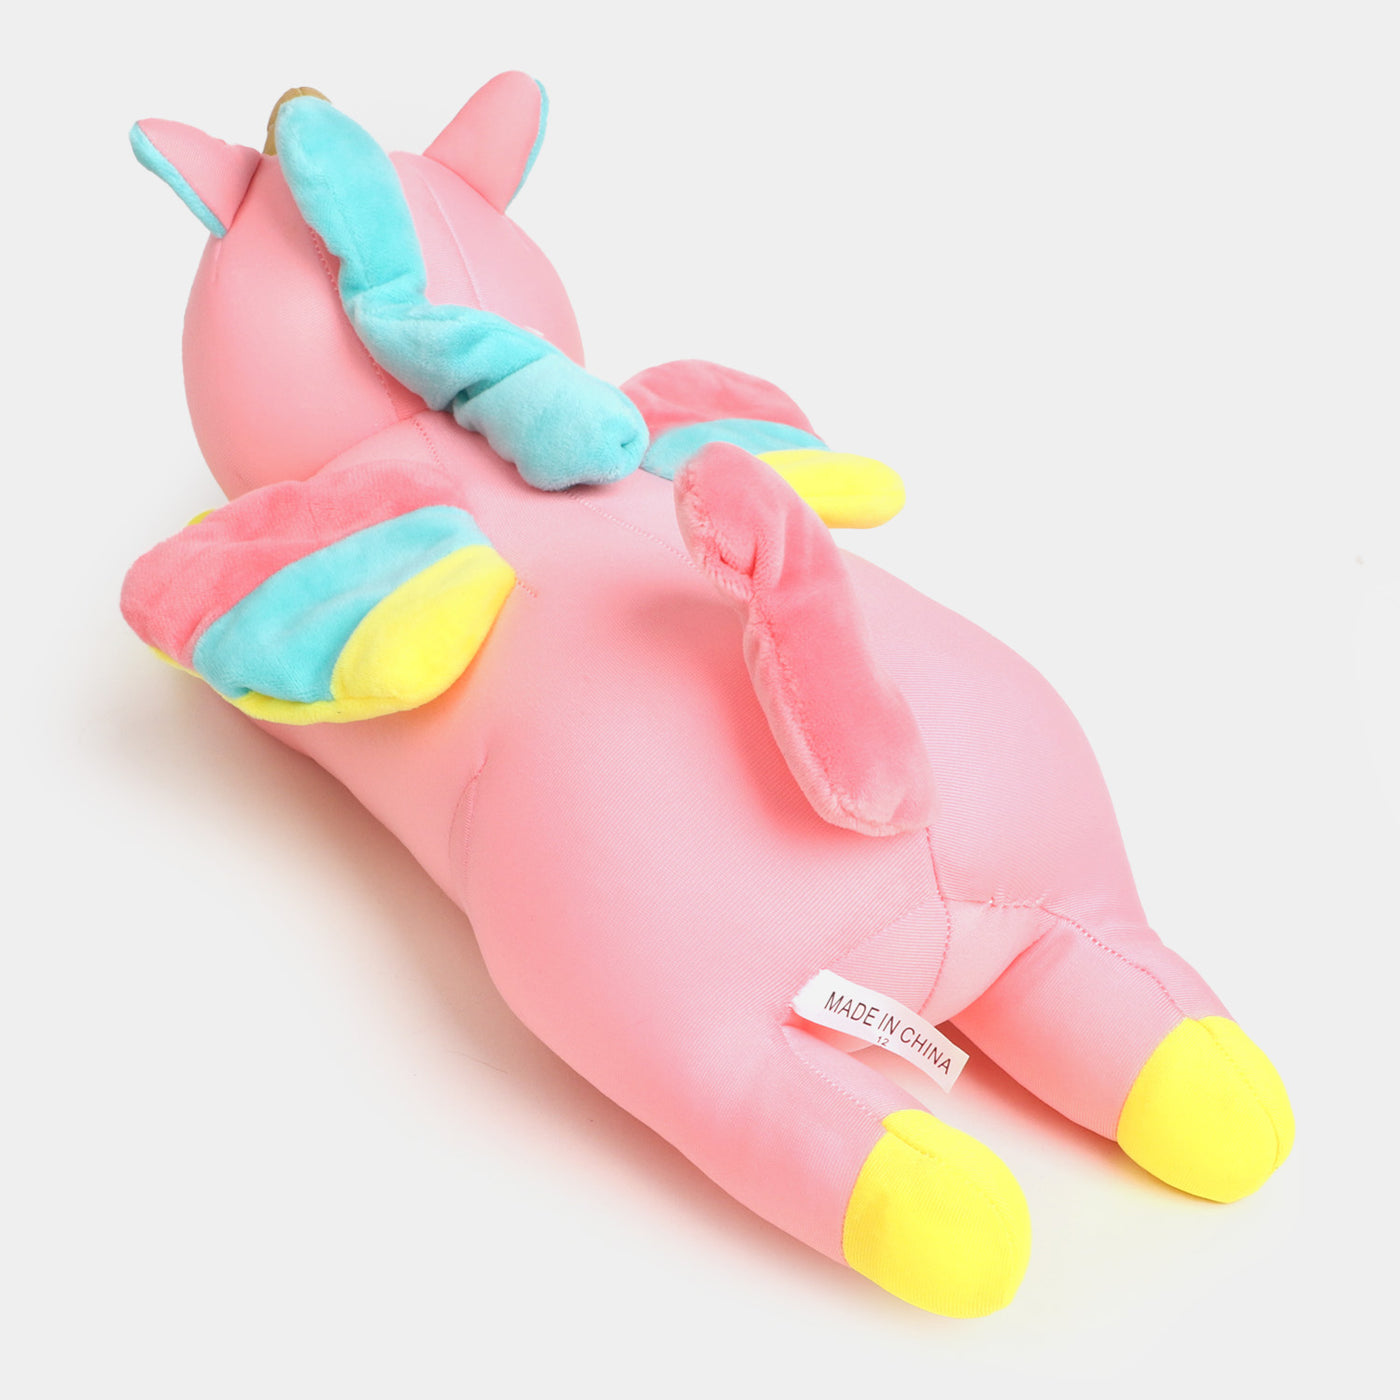 Soft Bean Character Lying Small Toy - Pink